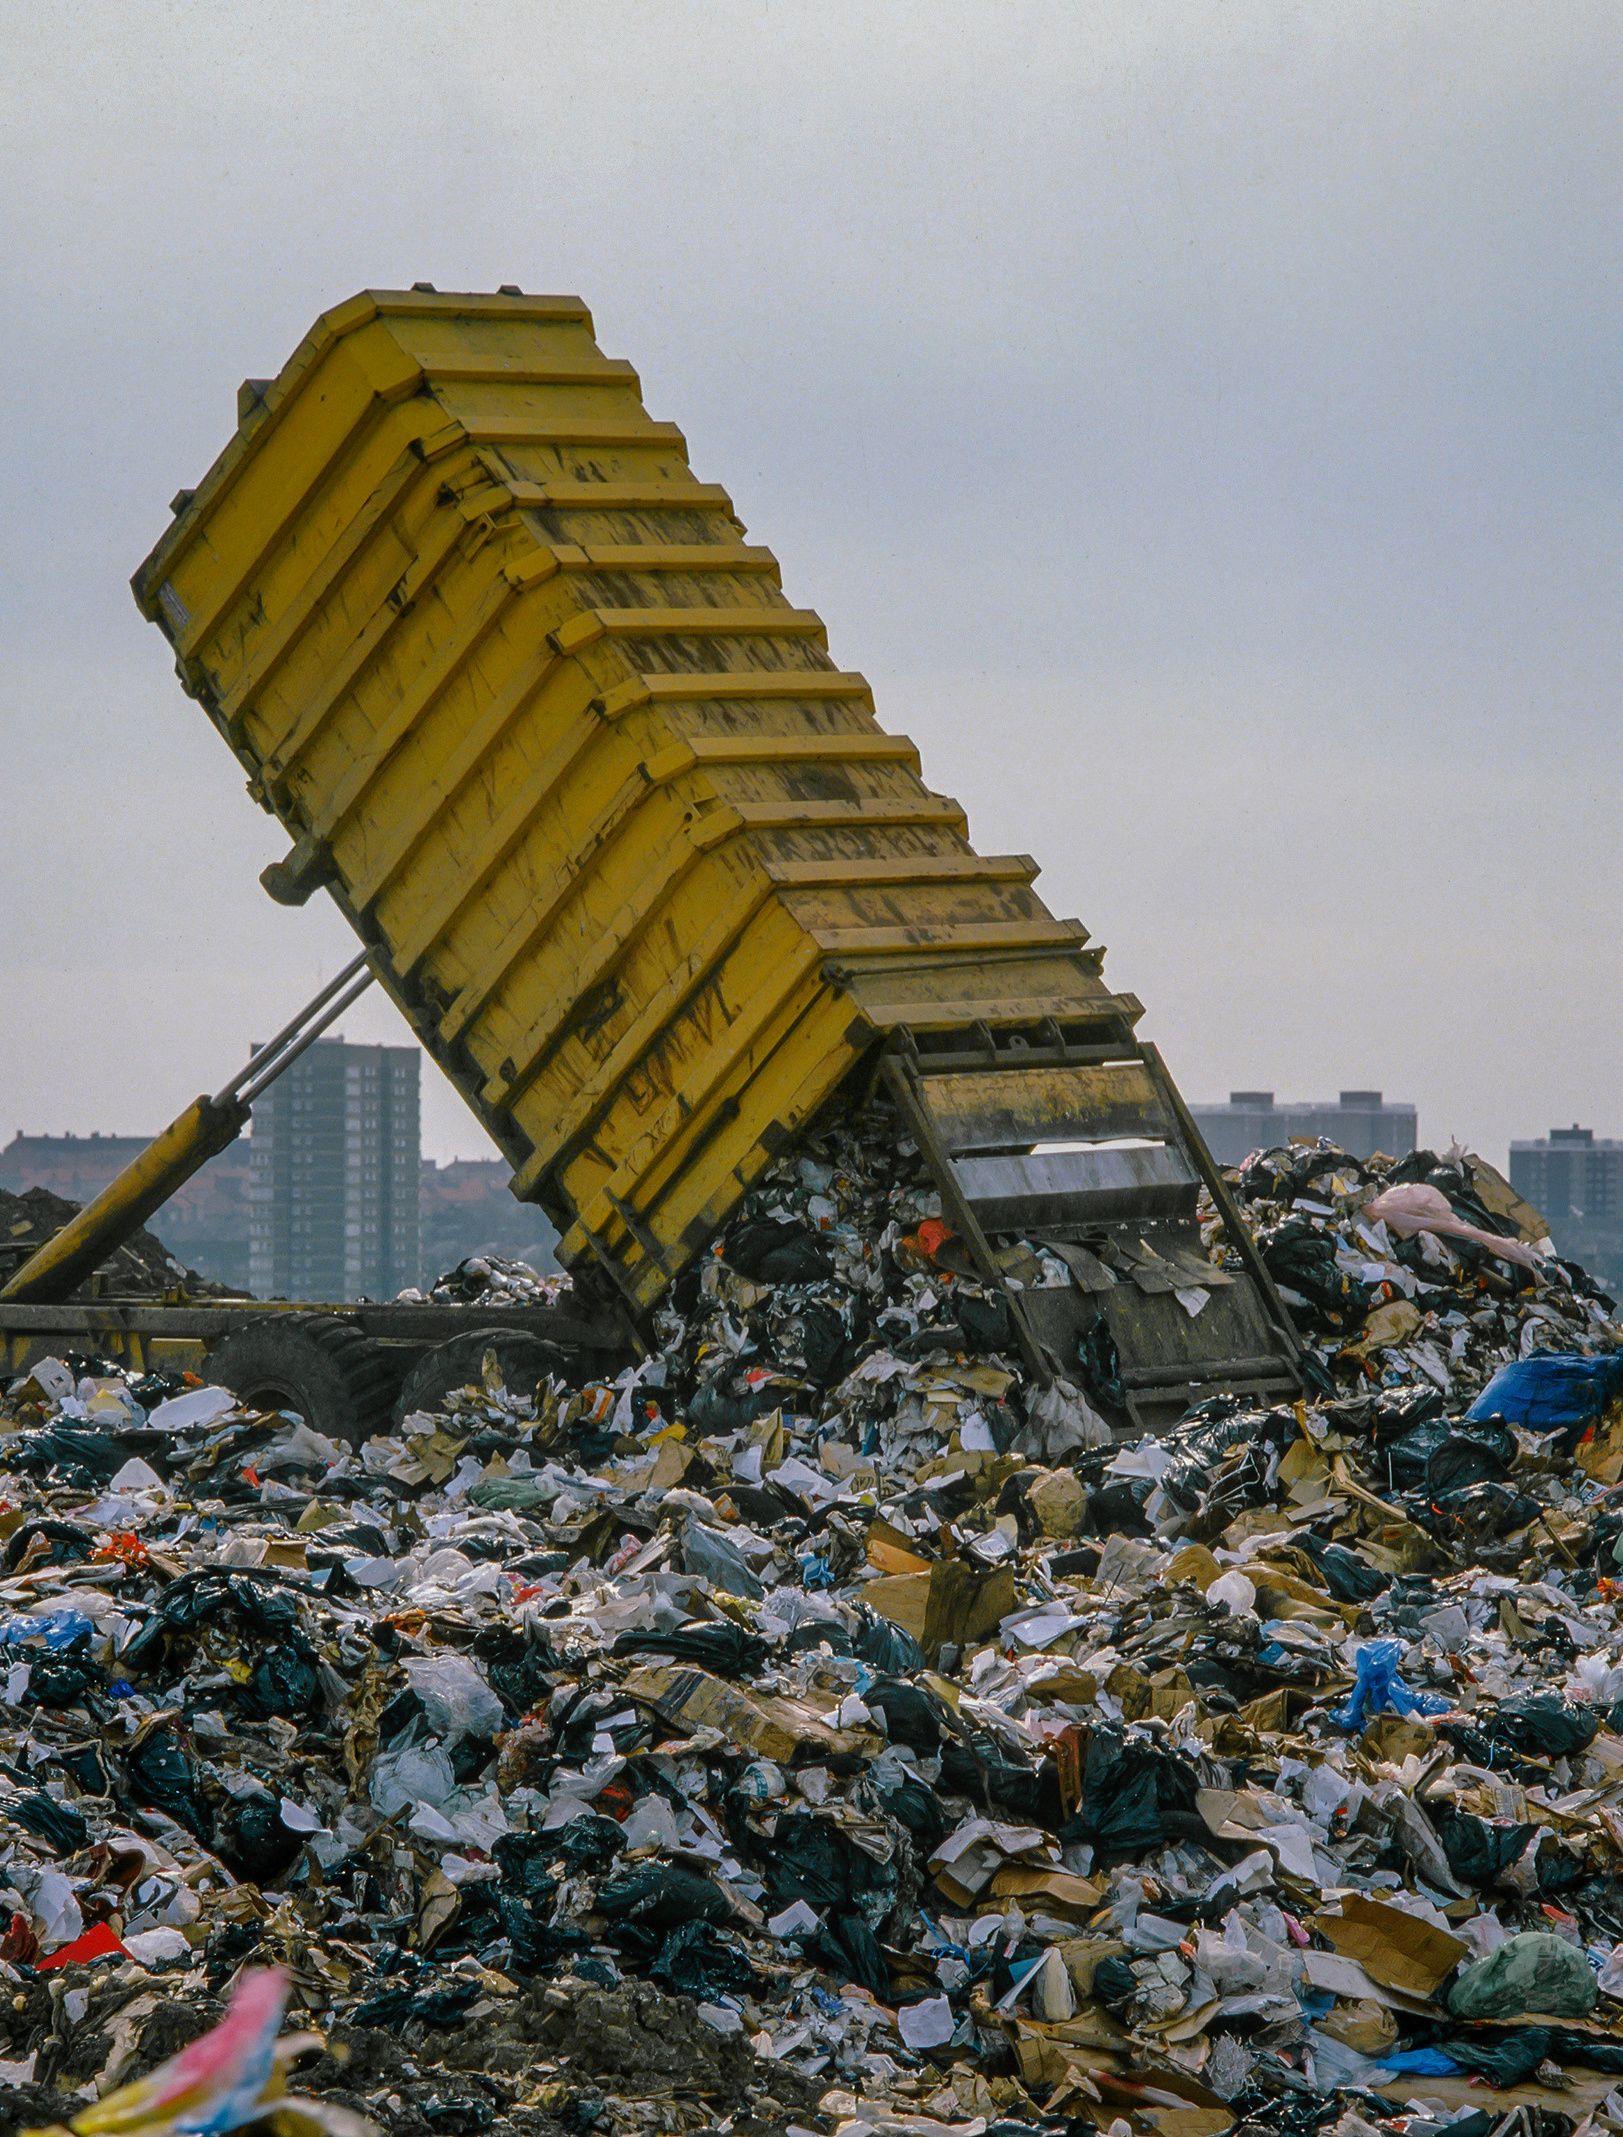 Truck unloading waste onto landfill site